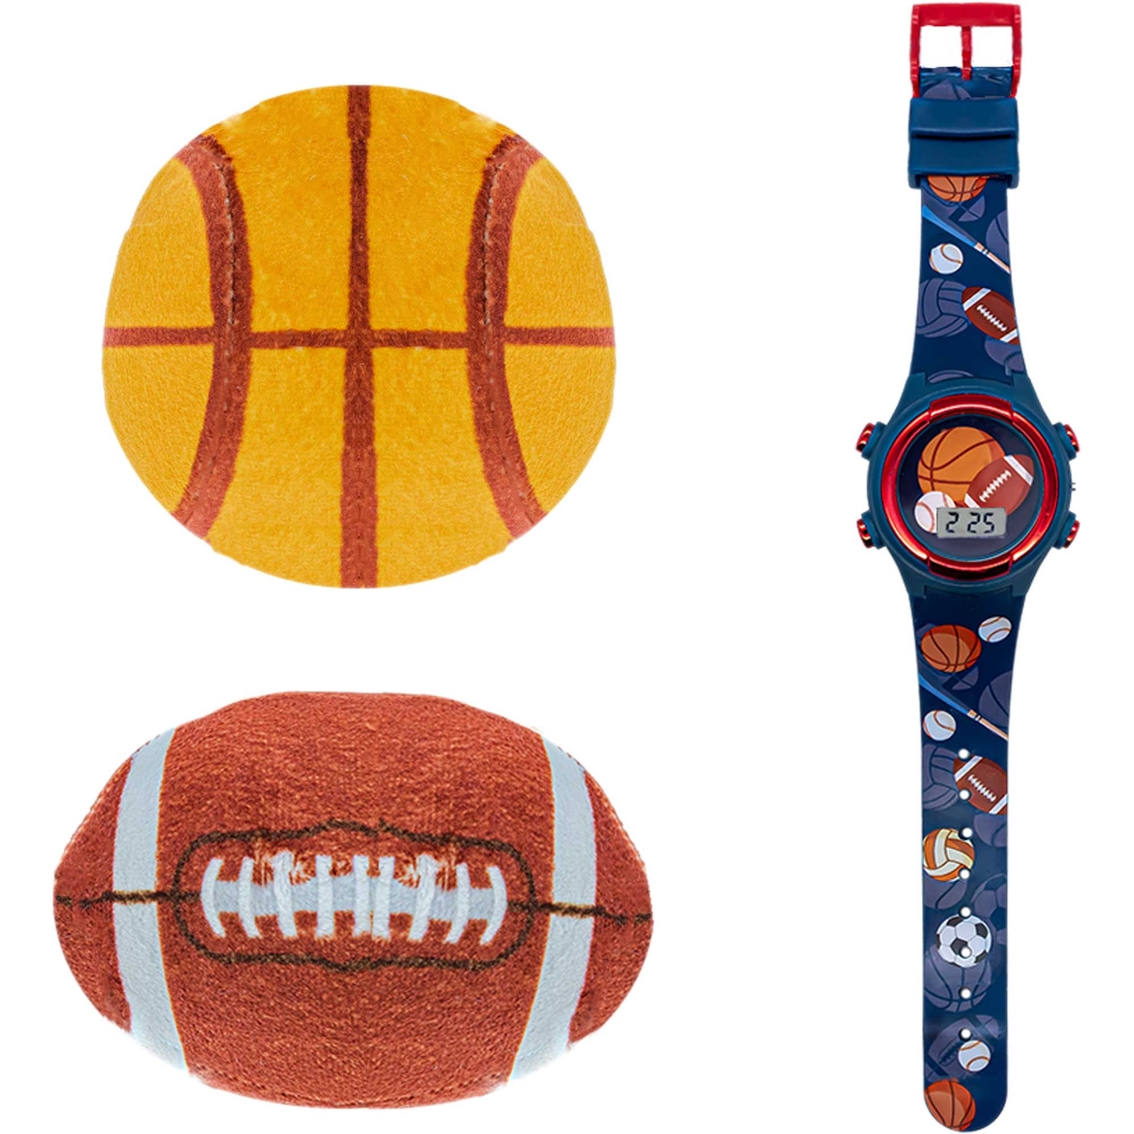 Play Zoom LCD Watch and Mini Football and Basketball Set - Image 2 of 2